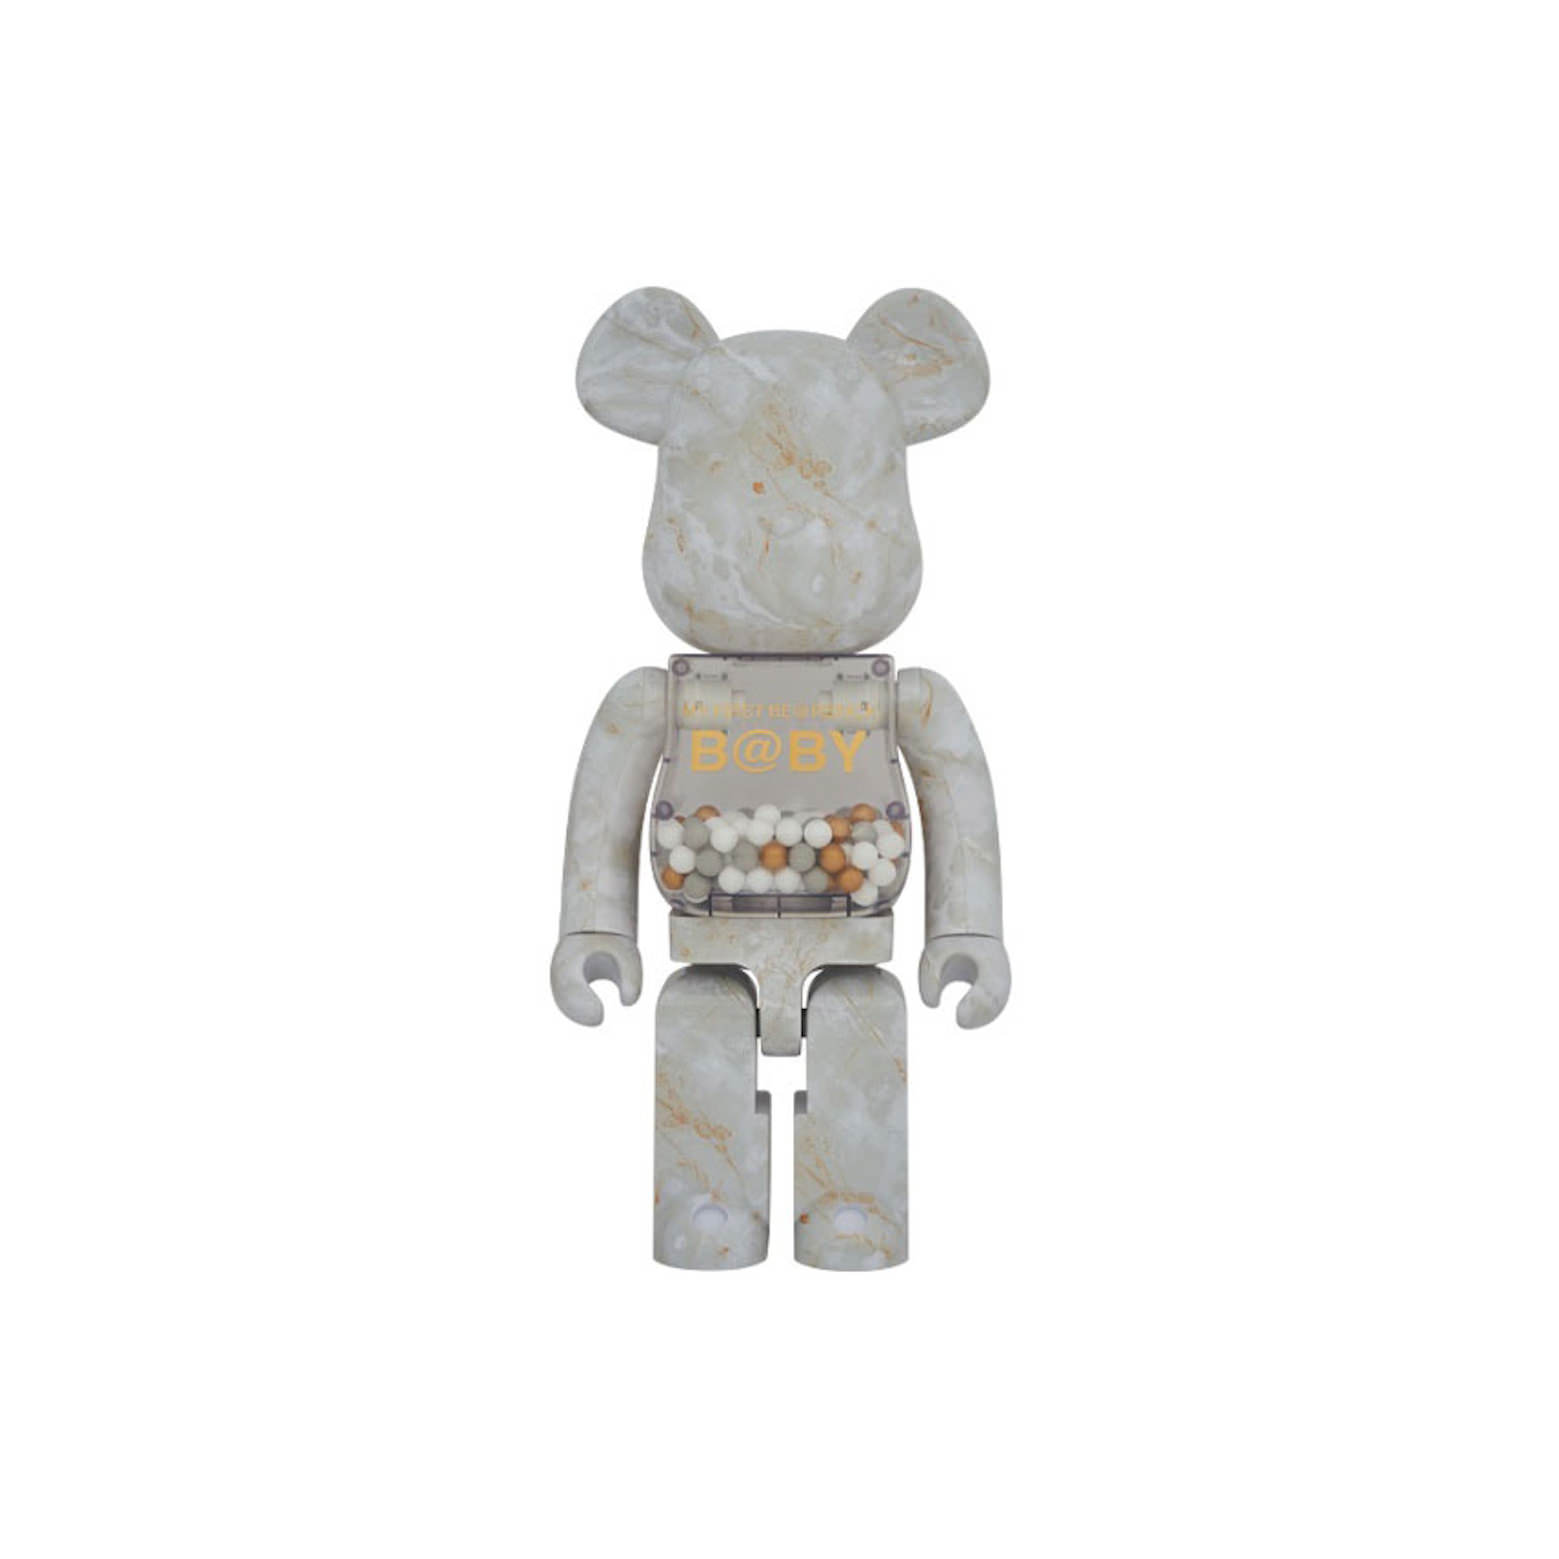 My First BE@RBRICK B@by MARBLE  400%